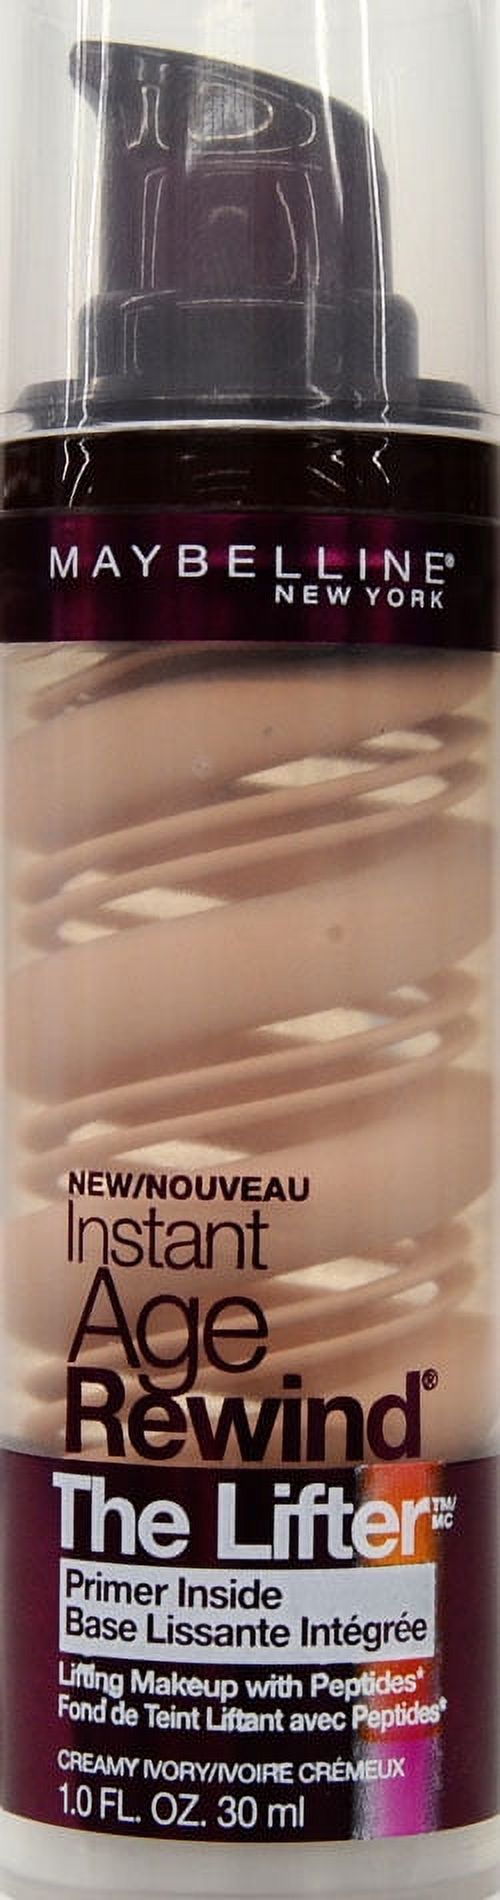 Maybelline Instant Age Rewind The Lifter Foundation, Creamy Ivory, 1 fl oz, Creamy Ivory - image 2 of 3